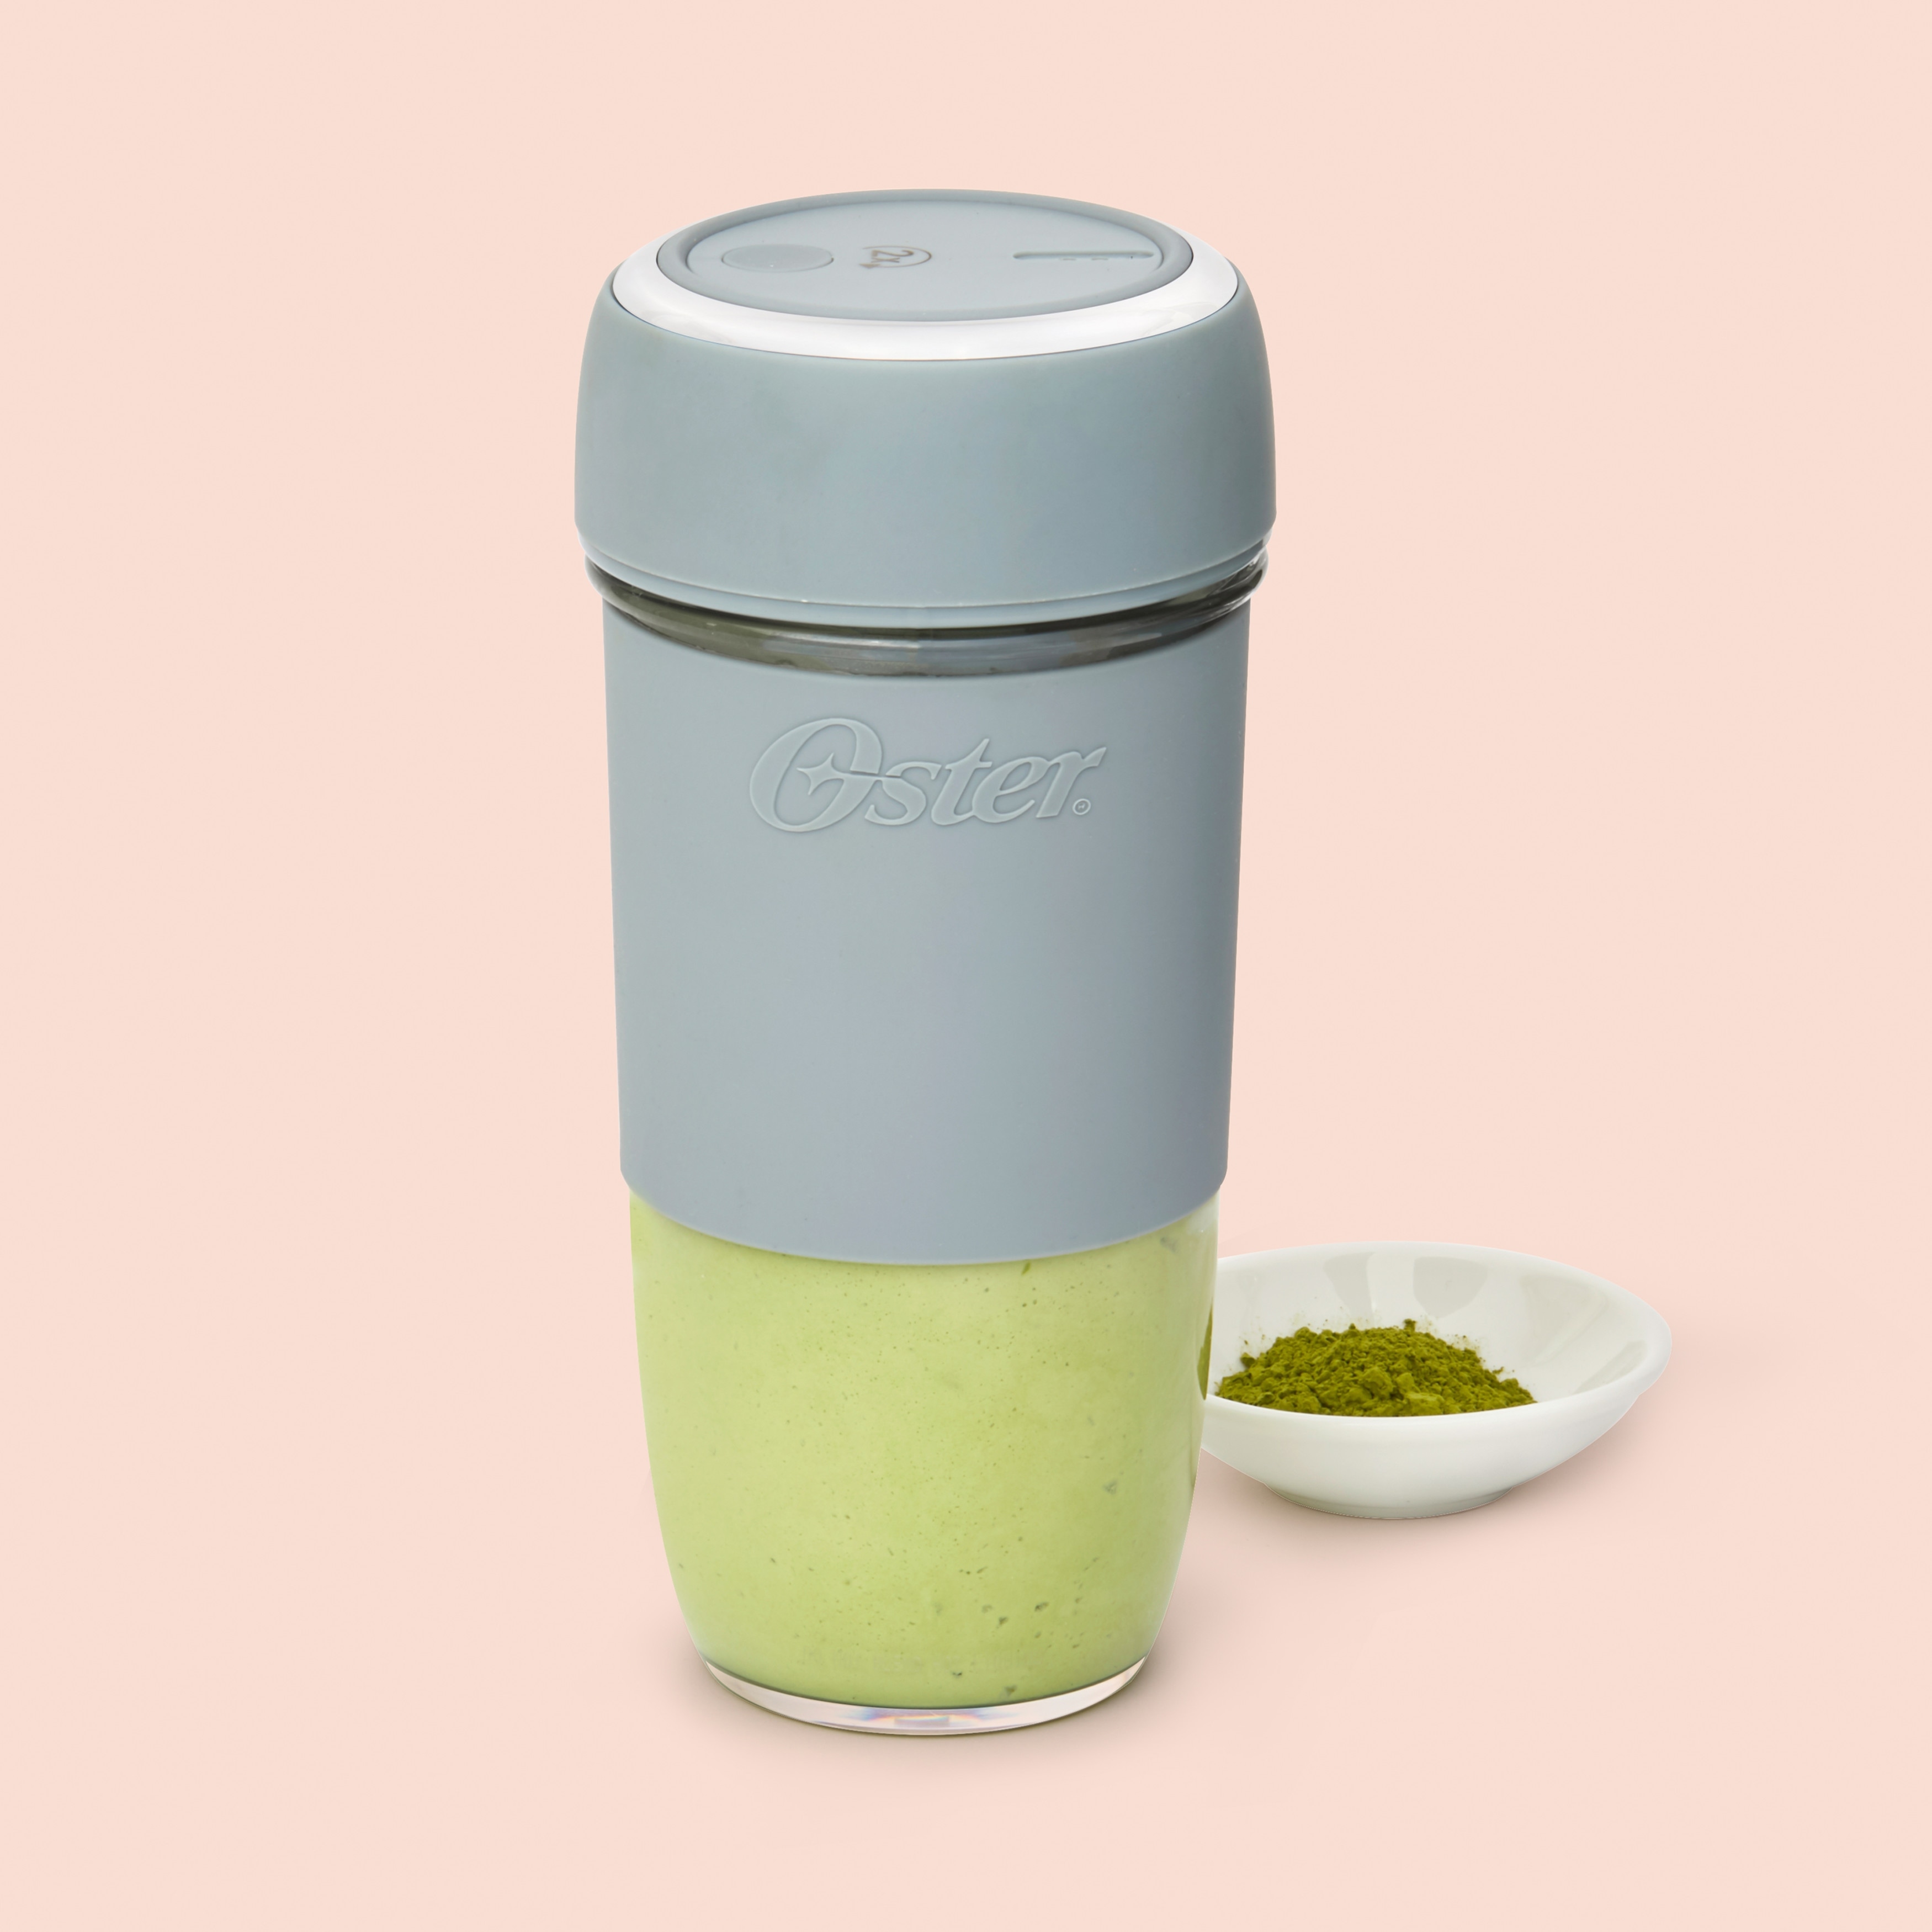 https://ak1.ostkcdn.com/images/products/is/images/direct/c8fb3e3e2a84ab286bb732e213798cd35d91c1ef/Oster%C2%AE-Blend-Active-Portable-Blender-with-Drinking-Lid%2C-Gray.jpg